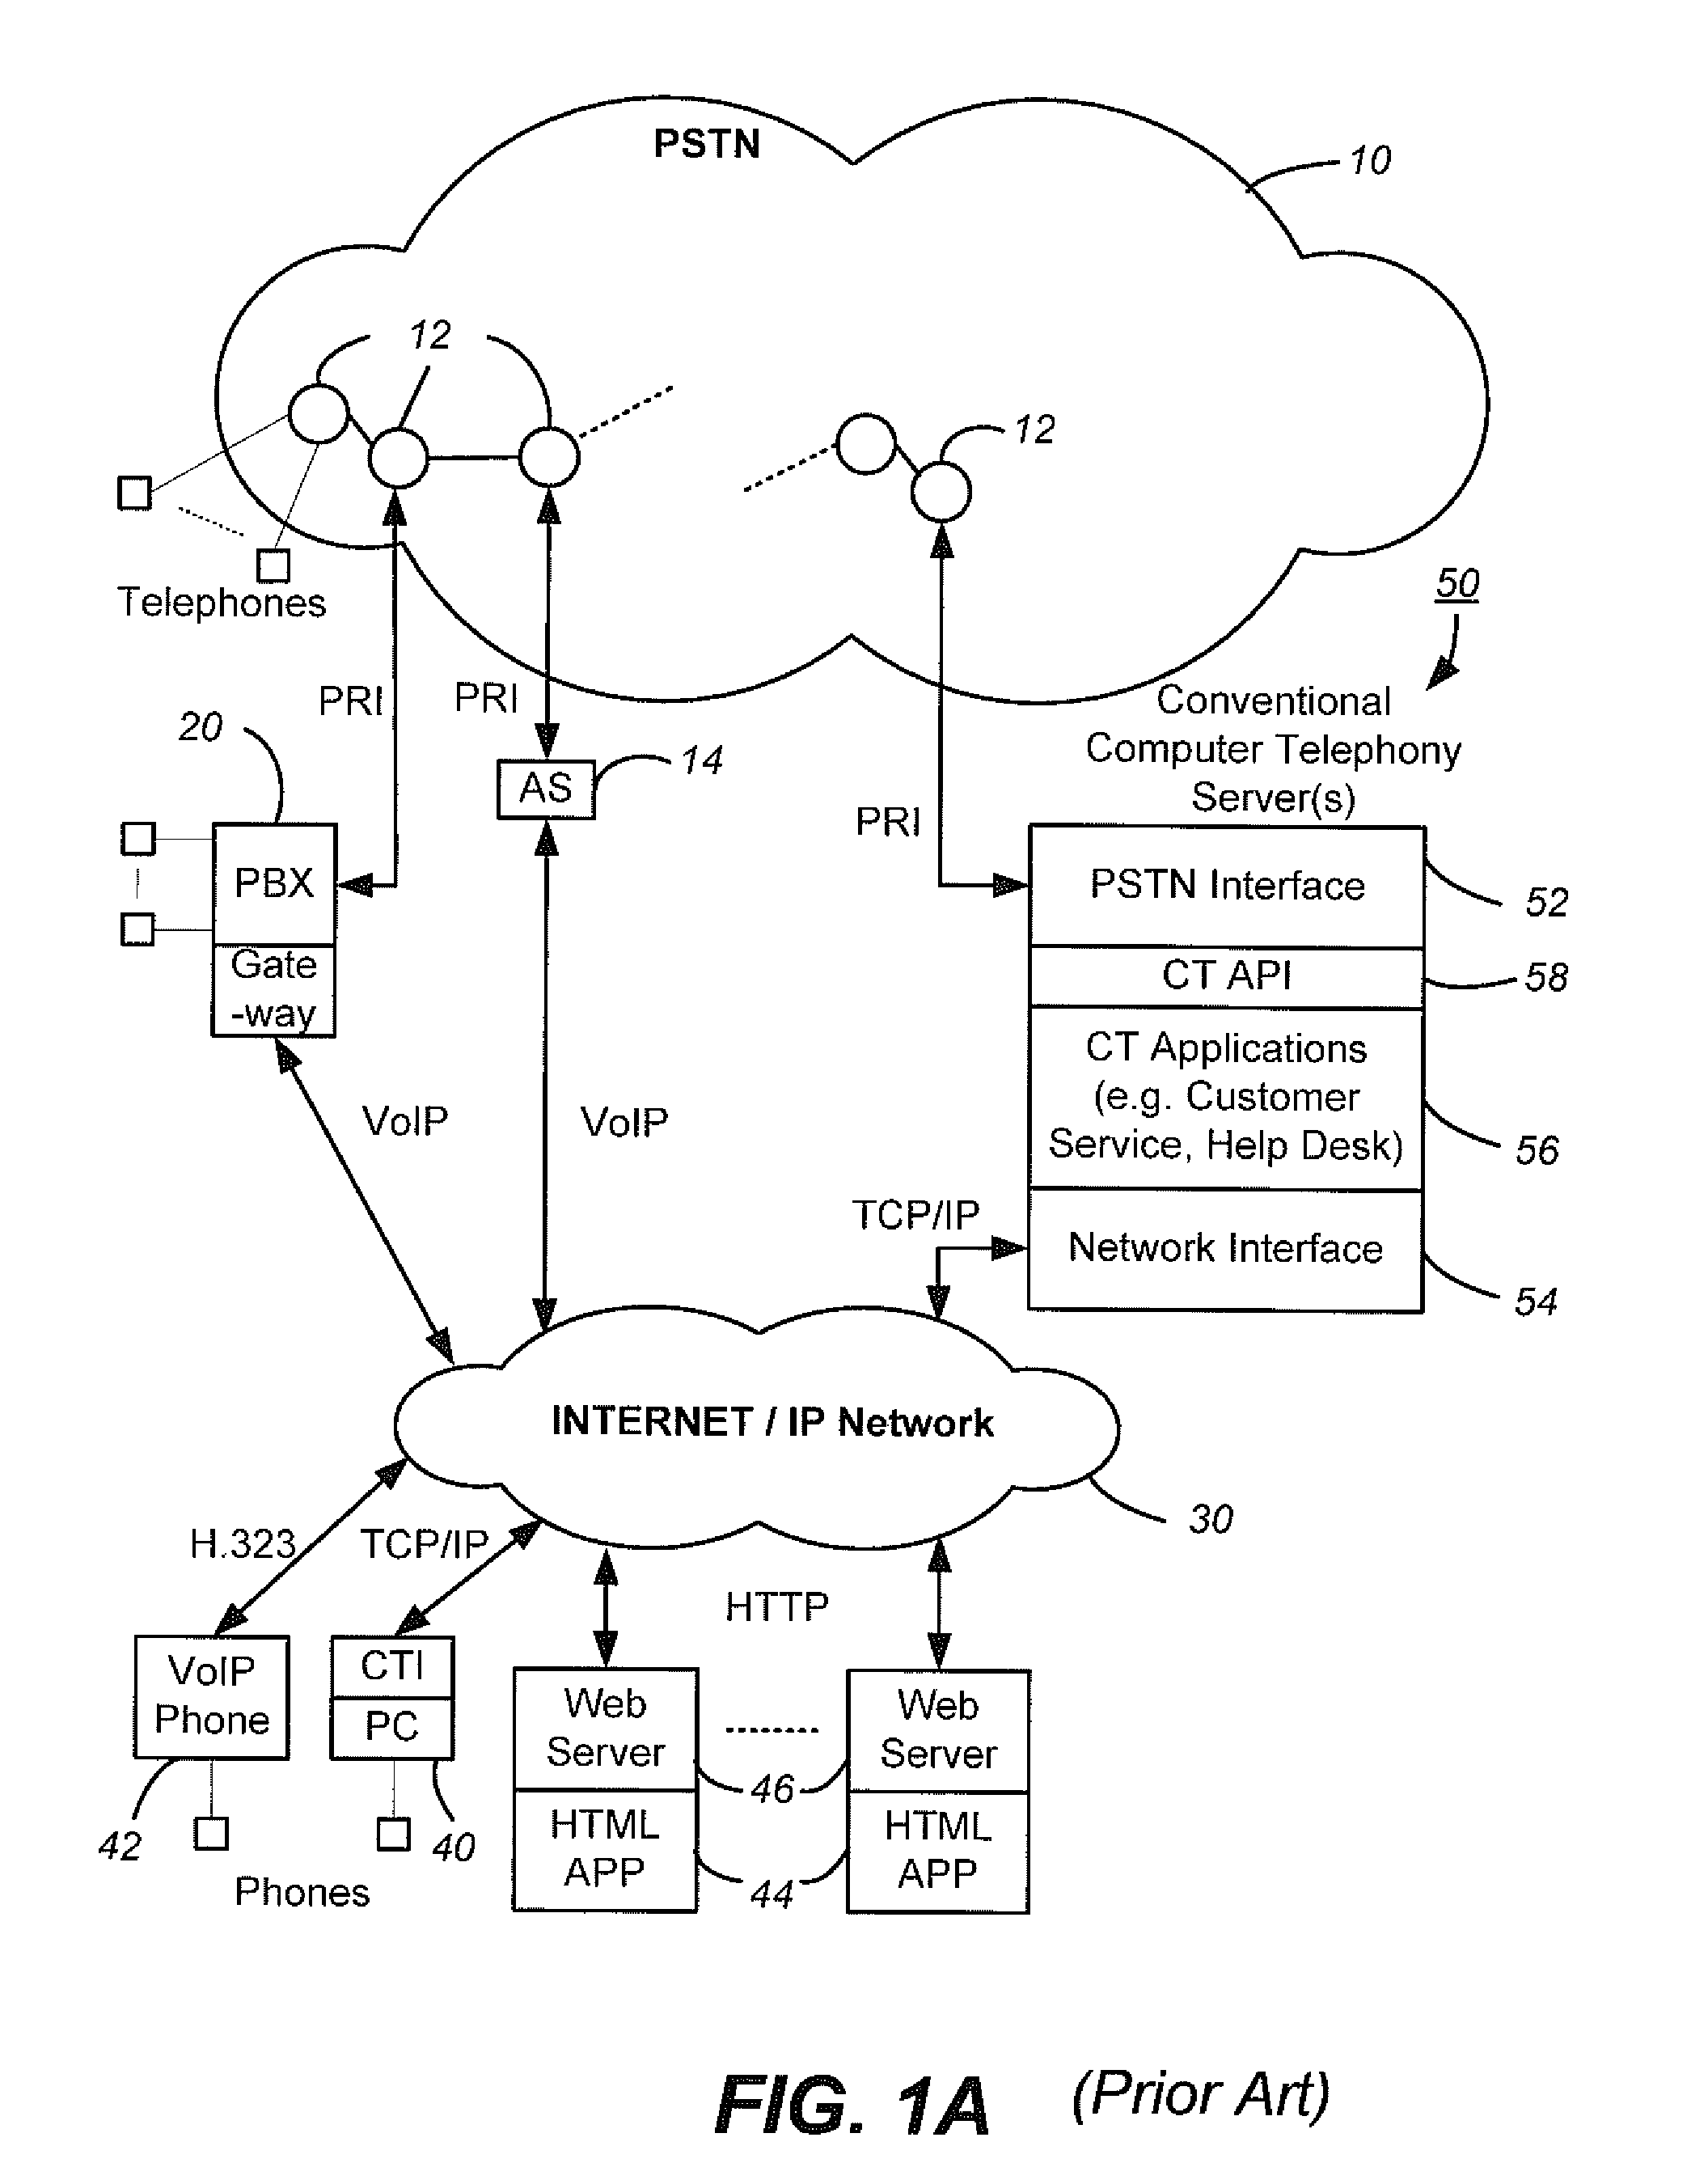 System and method for dynamic telephony resource allocation between premise and hosted facilities